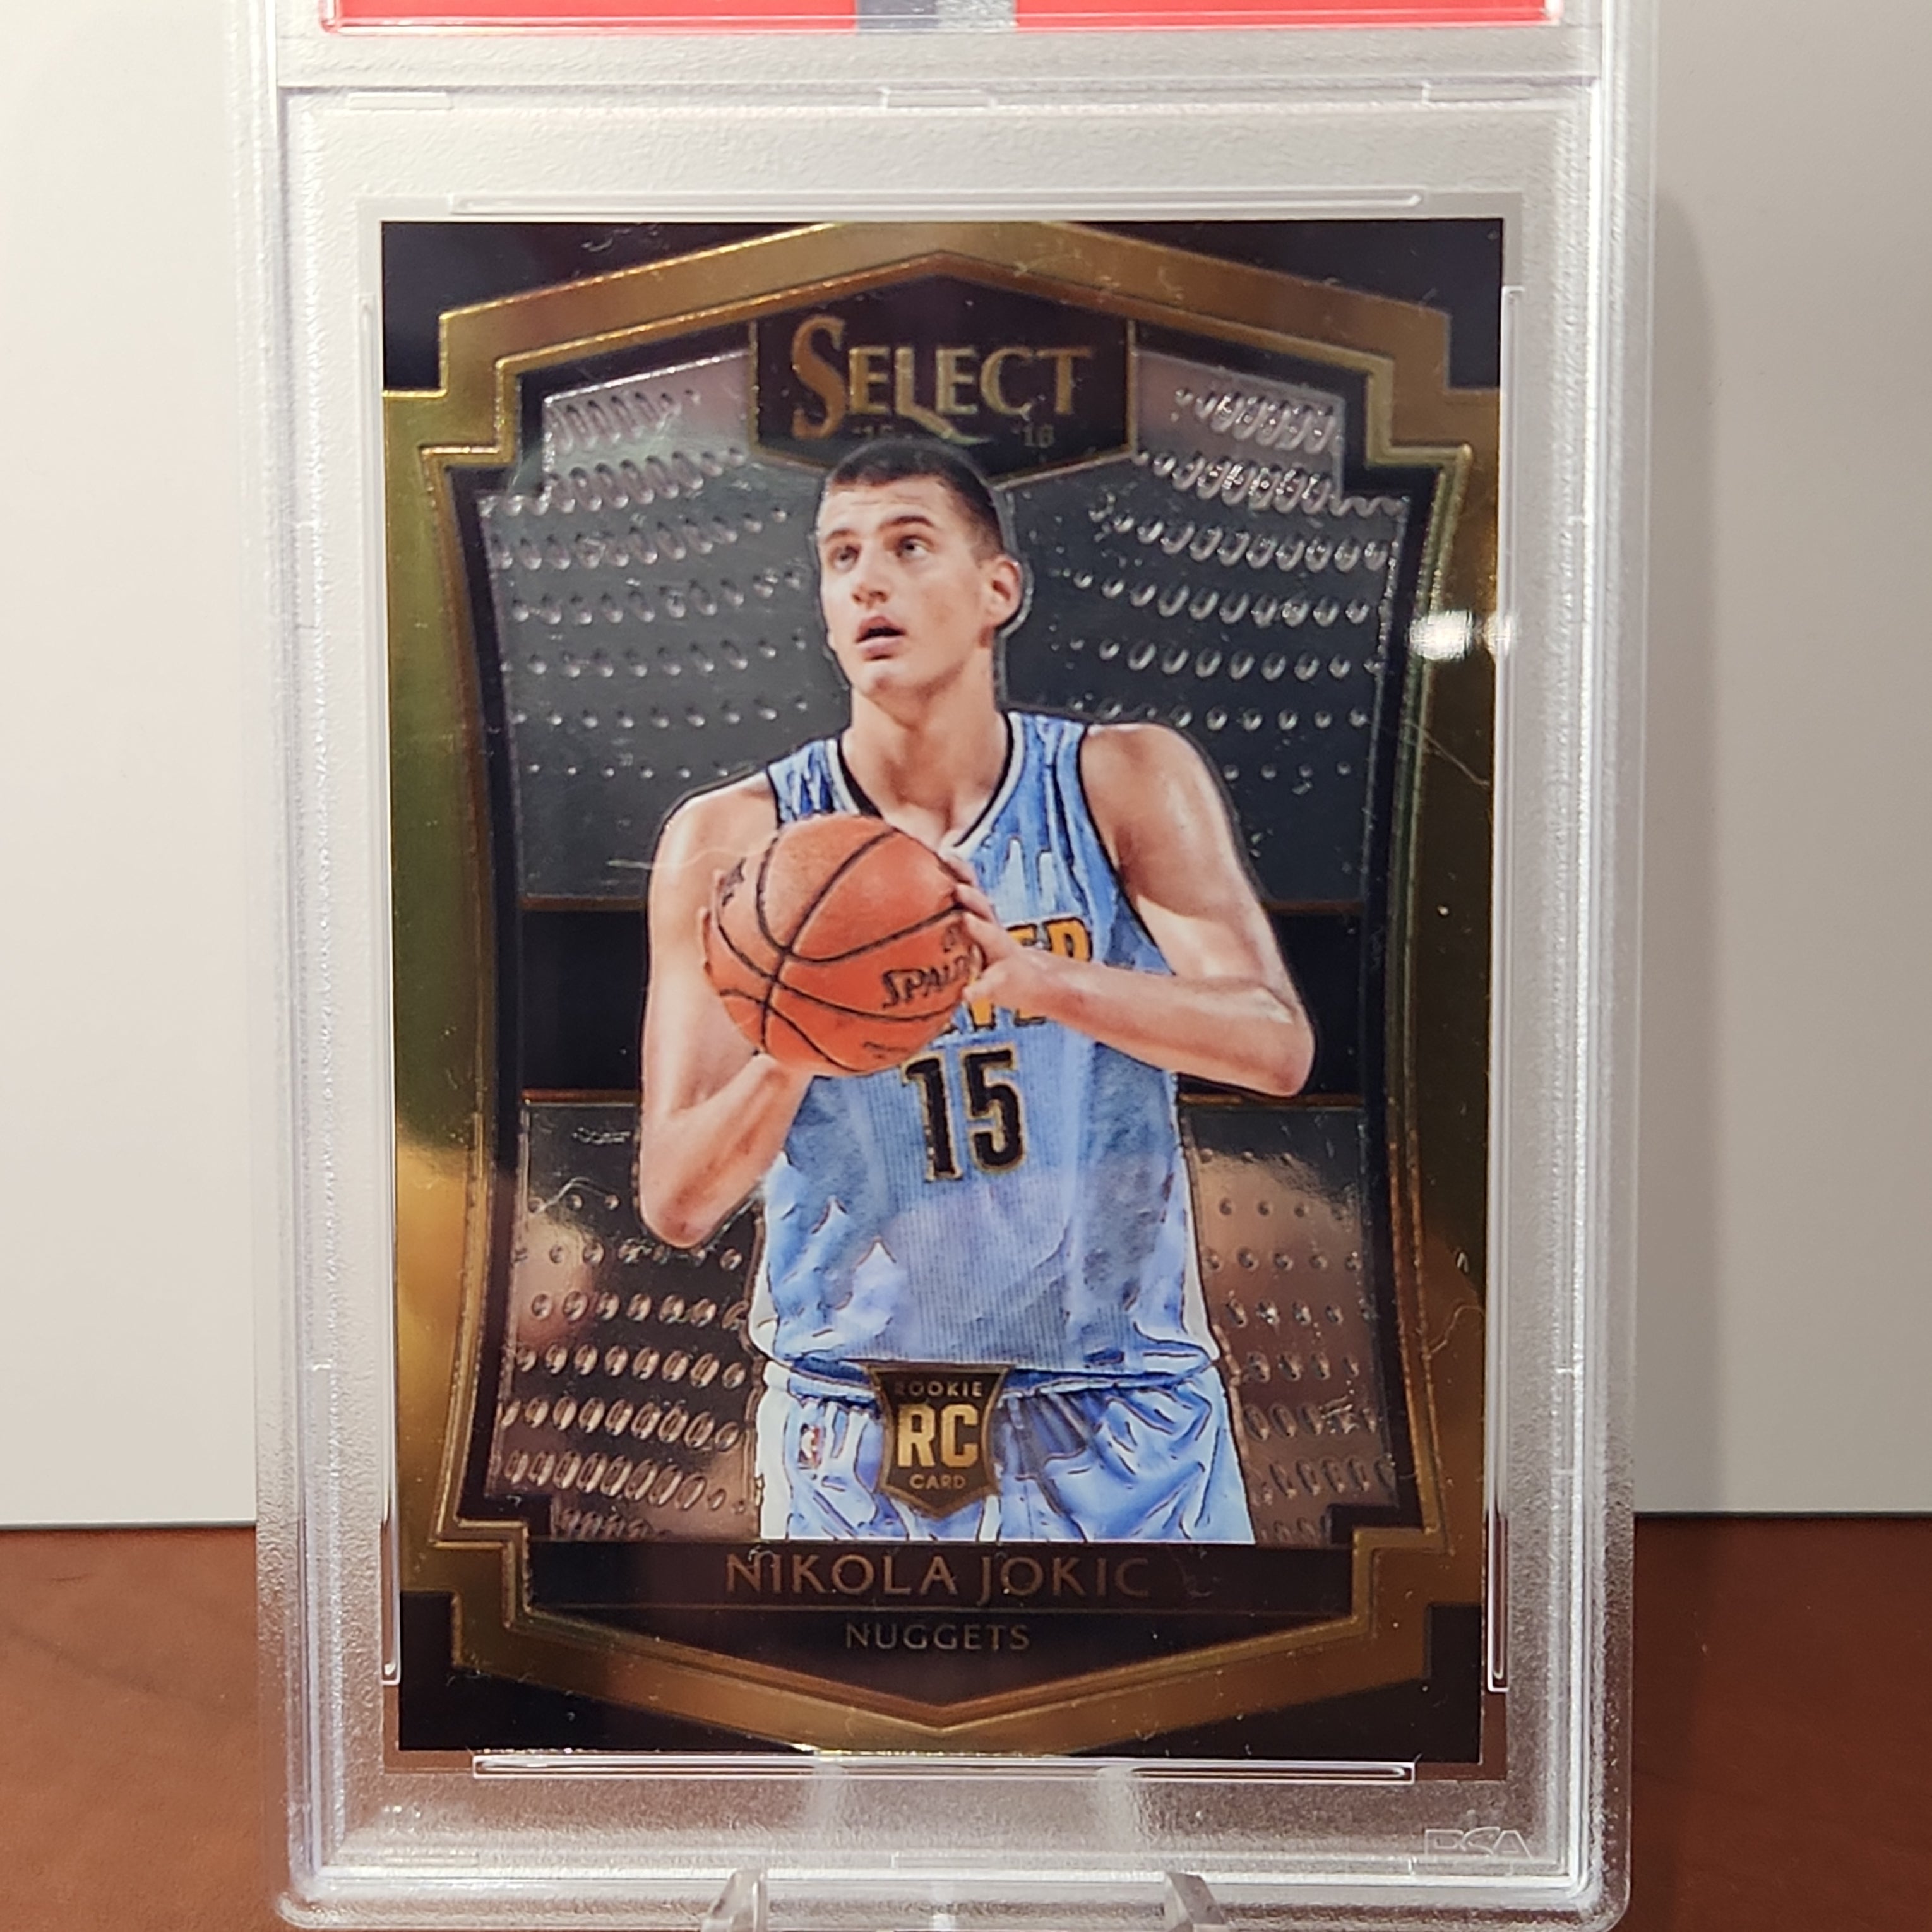 Nikola Jokic 2015/16 Select Rookie Card #128 **PSA MINT 9** - Premium  from 1of1 Collectables - Just $395! Shop now at 1of1 Collectables